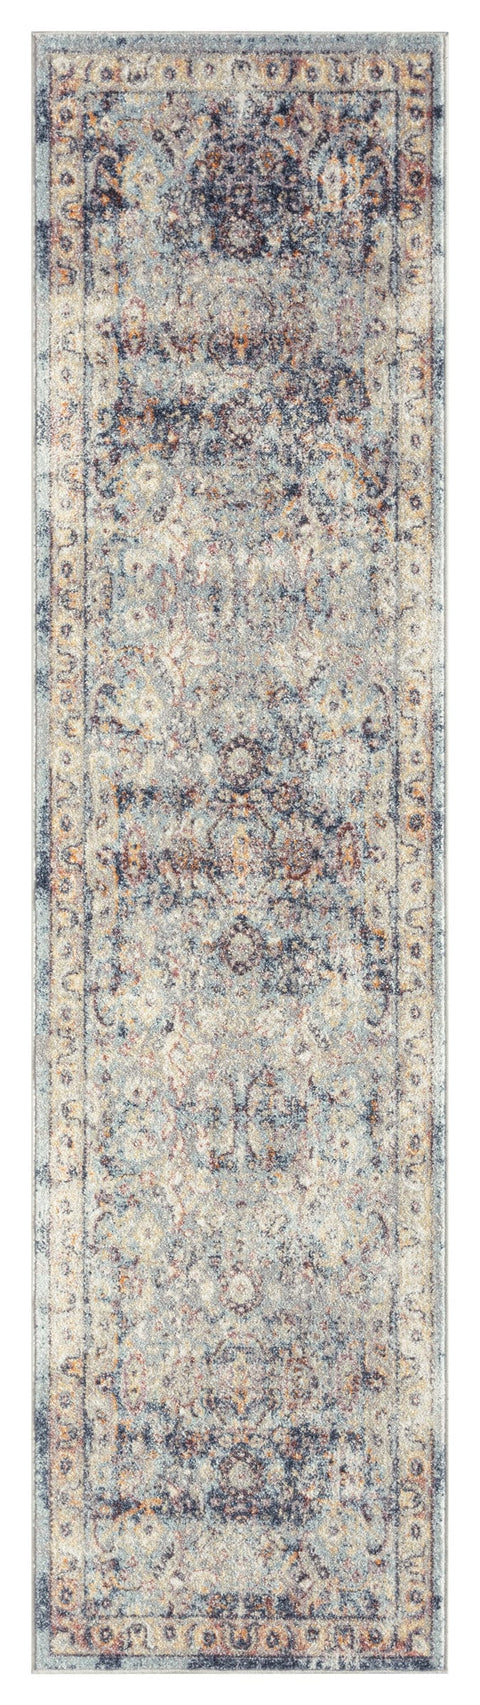 Huxley Blue and Purple Multi-Color Distressed Runner Rug